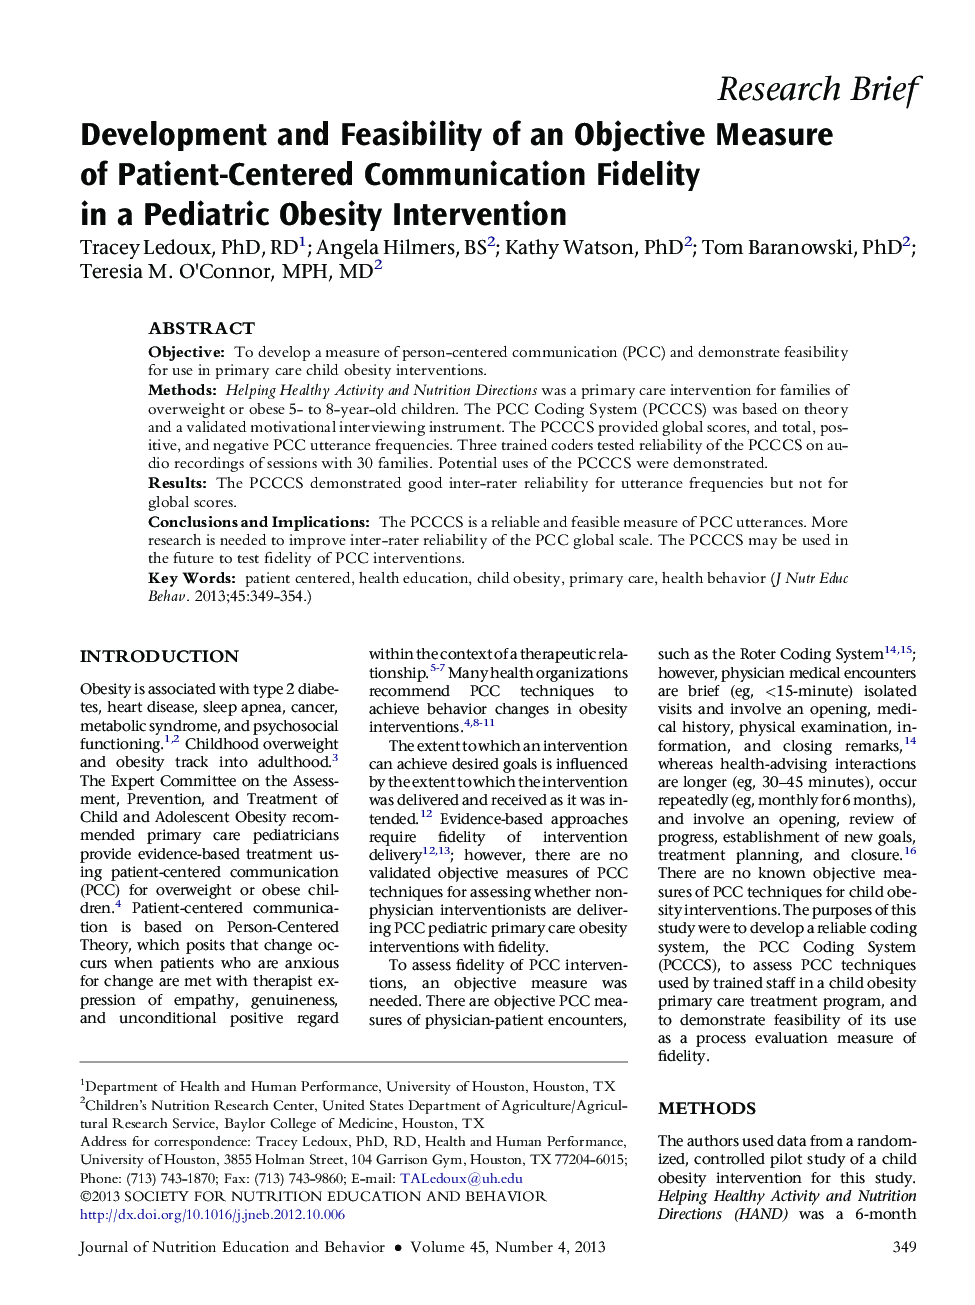 Development and Feasibility of an Objective Measure of Patient-Centered Communication Fidelity in a Pediatric Obesity Intervention